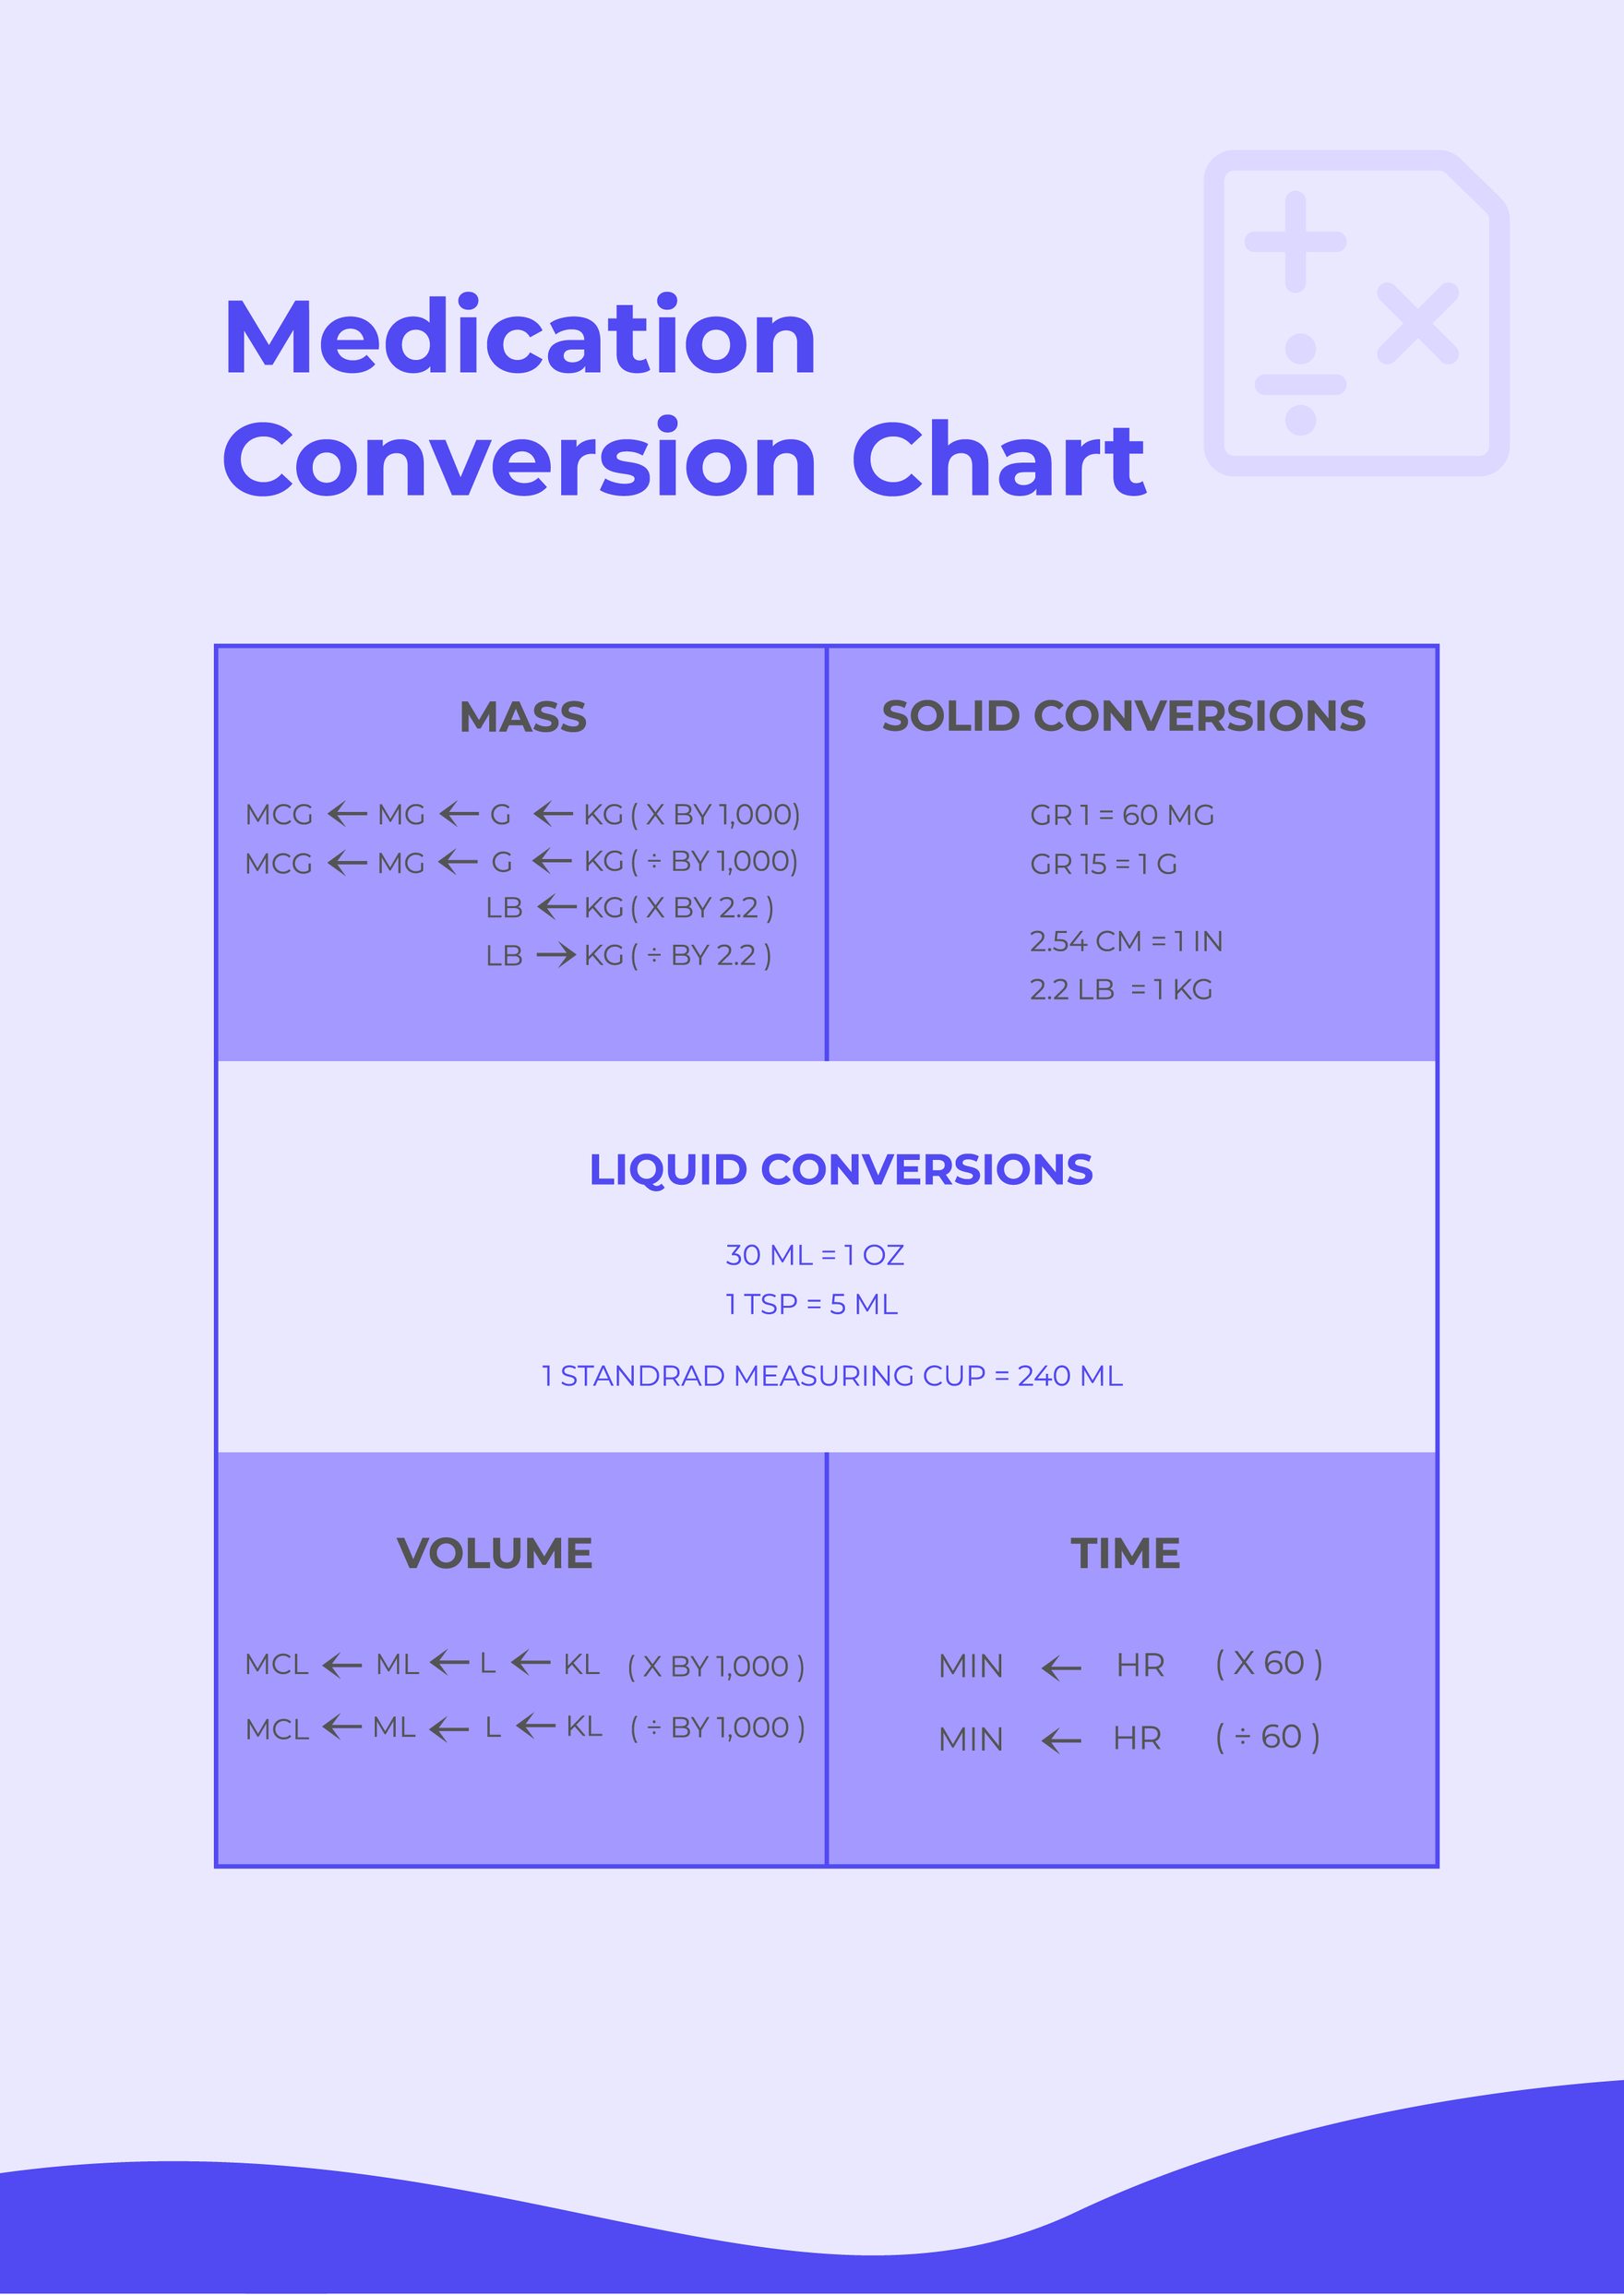 free-medication-conversion-chart-download-in-pdf-illustrator-template